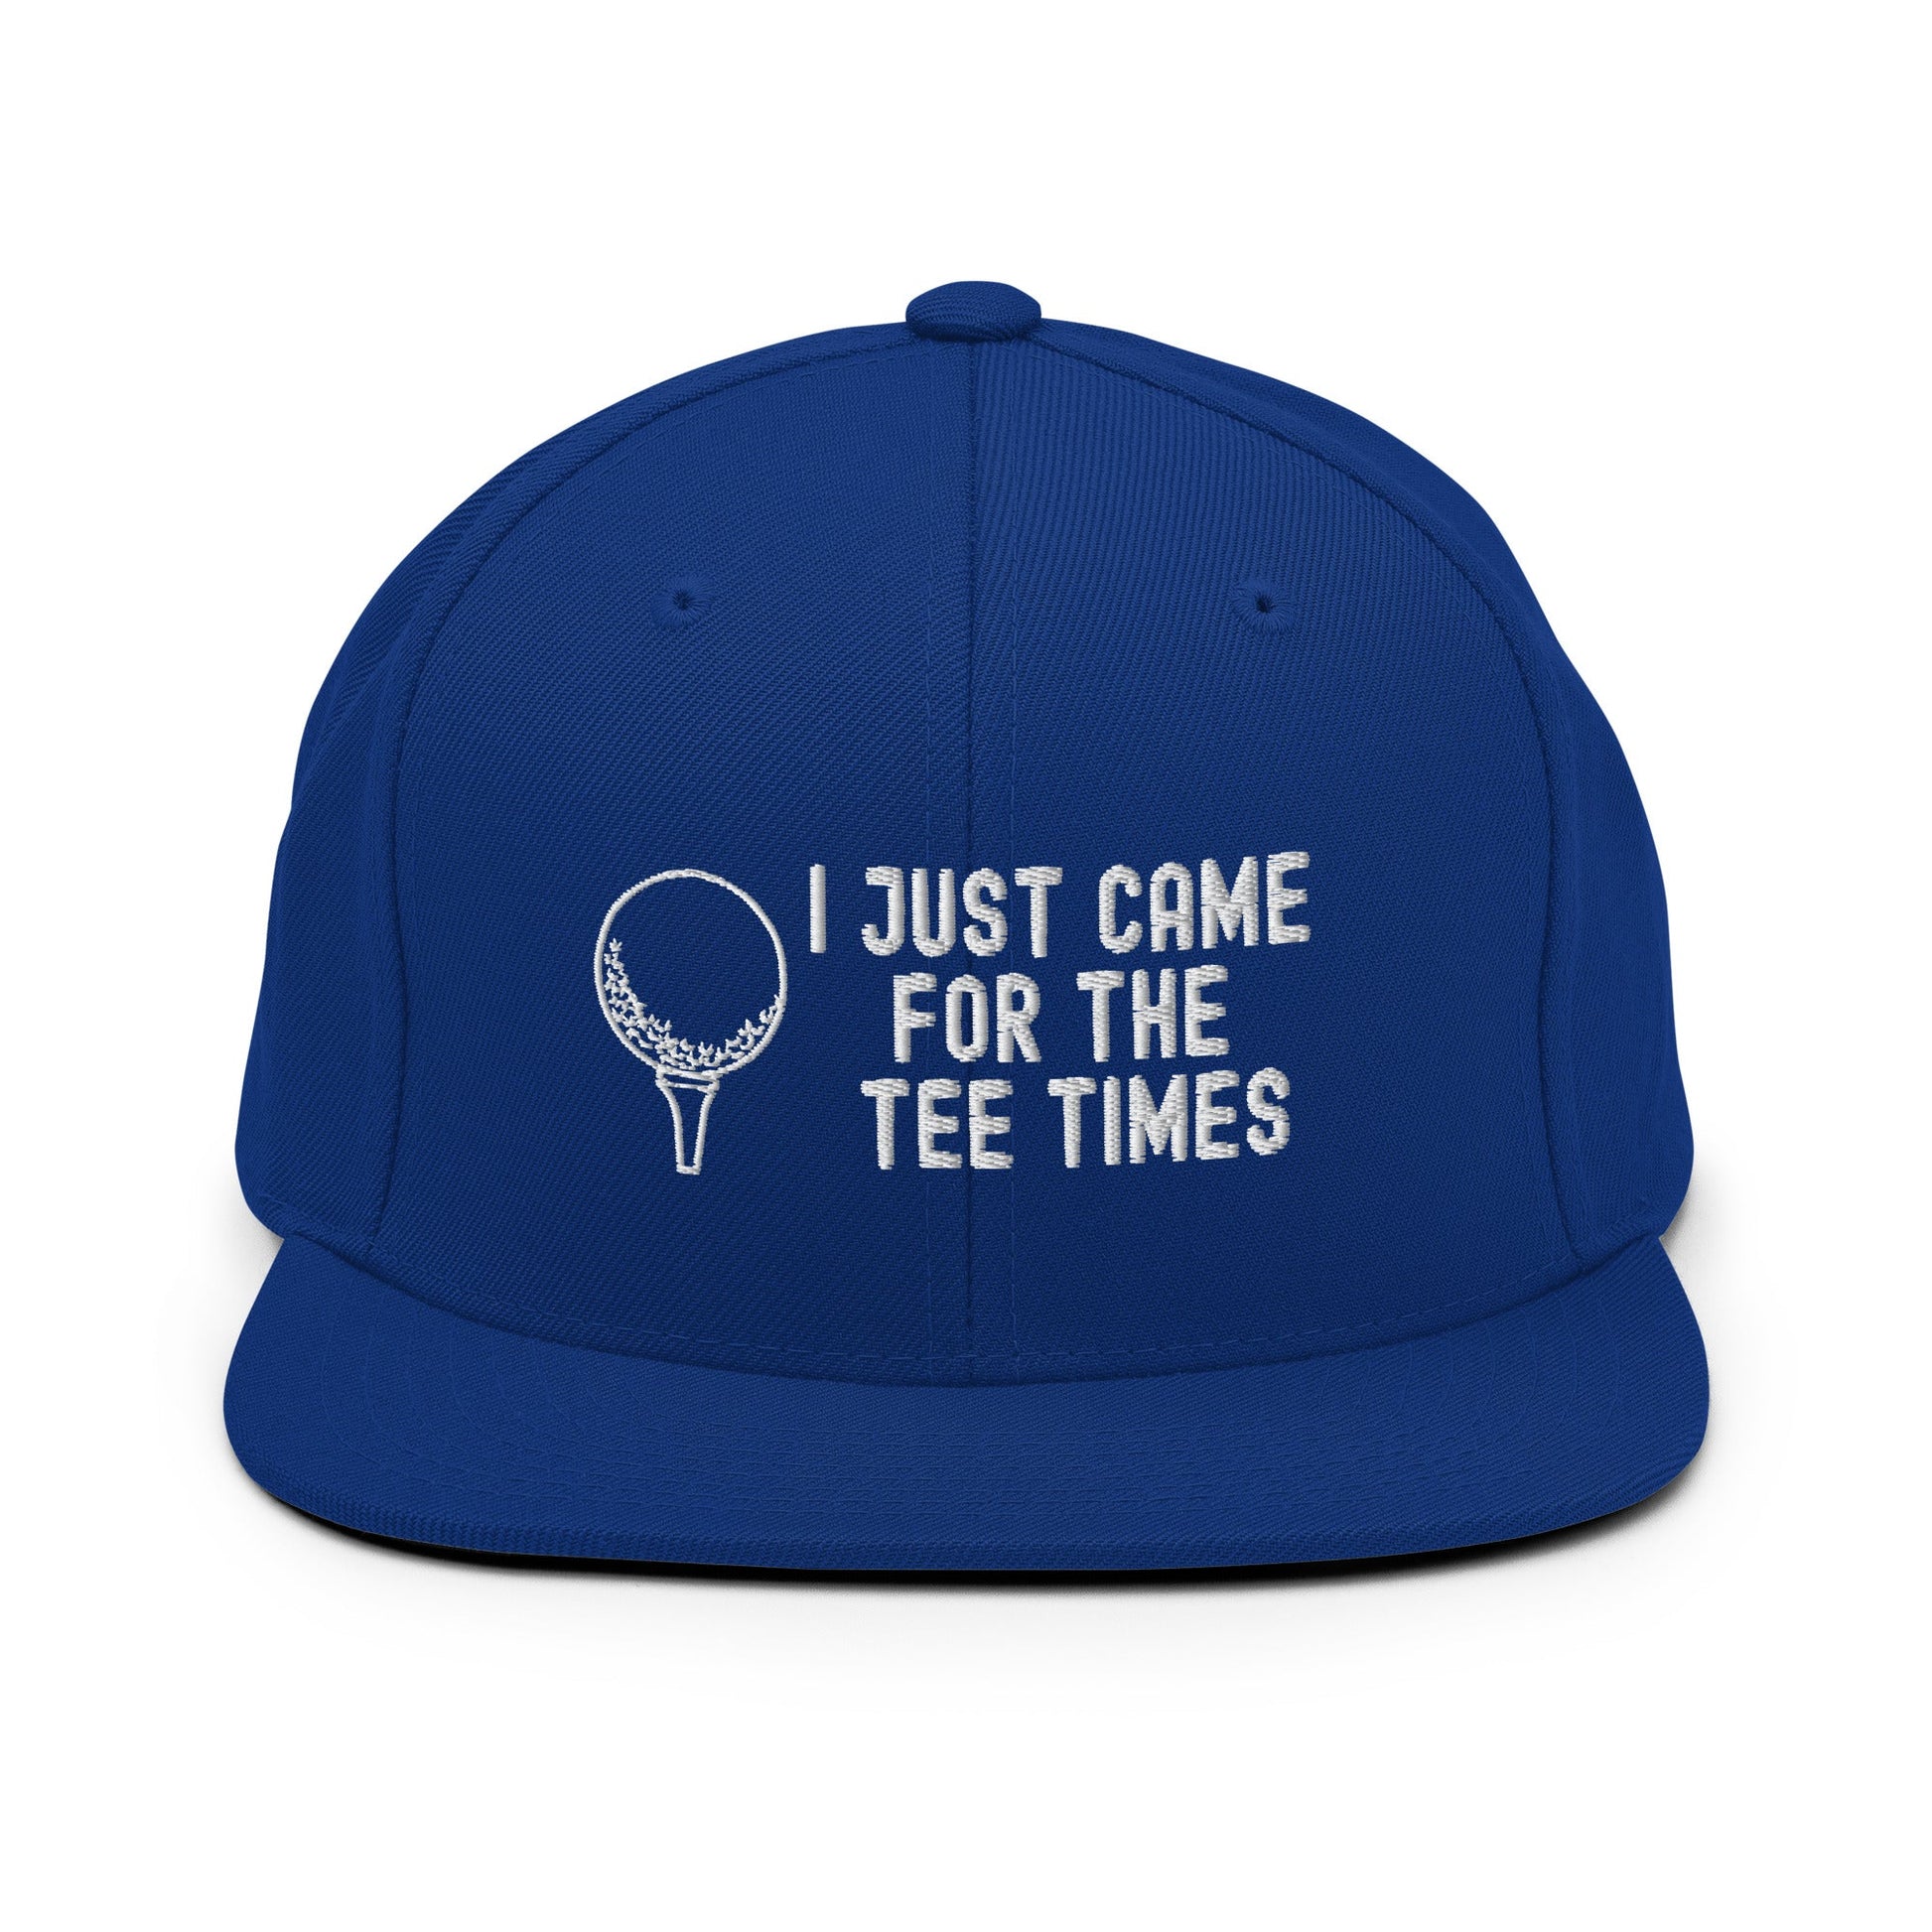 Funny Golfer Gifts  Snapback Hat Royal Blue I Just Came For The Tee Times Snapback Hat